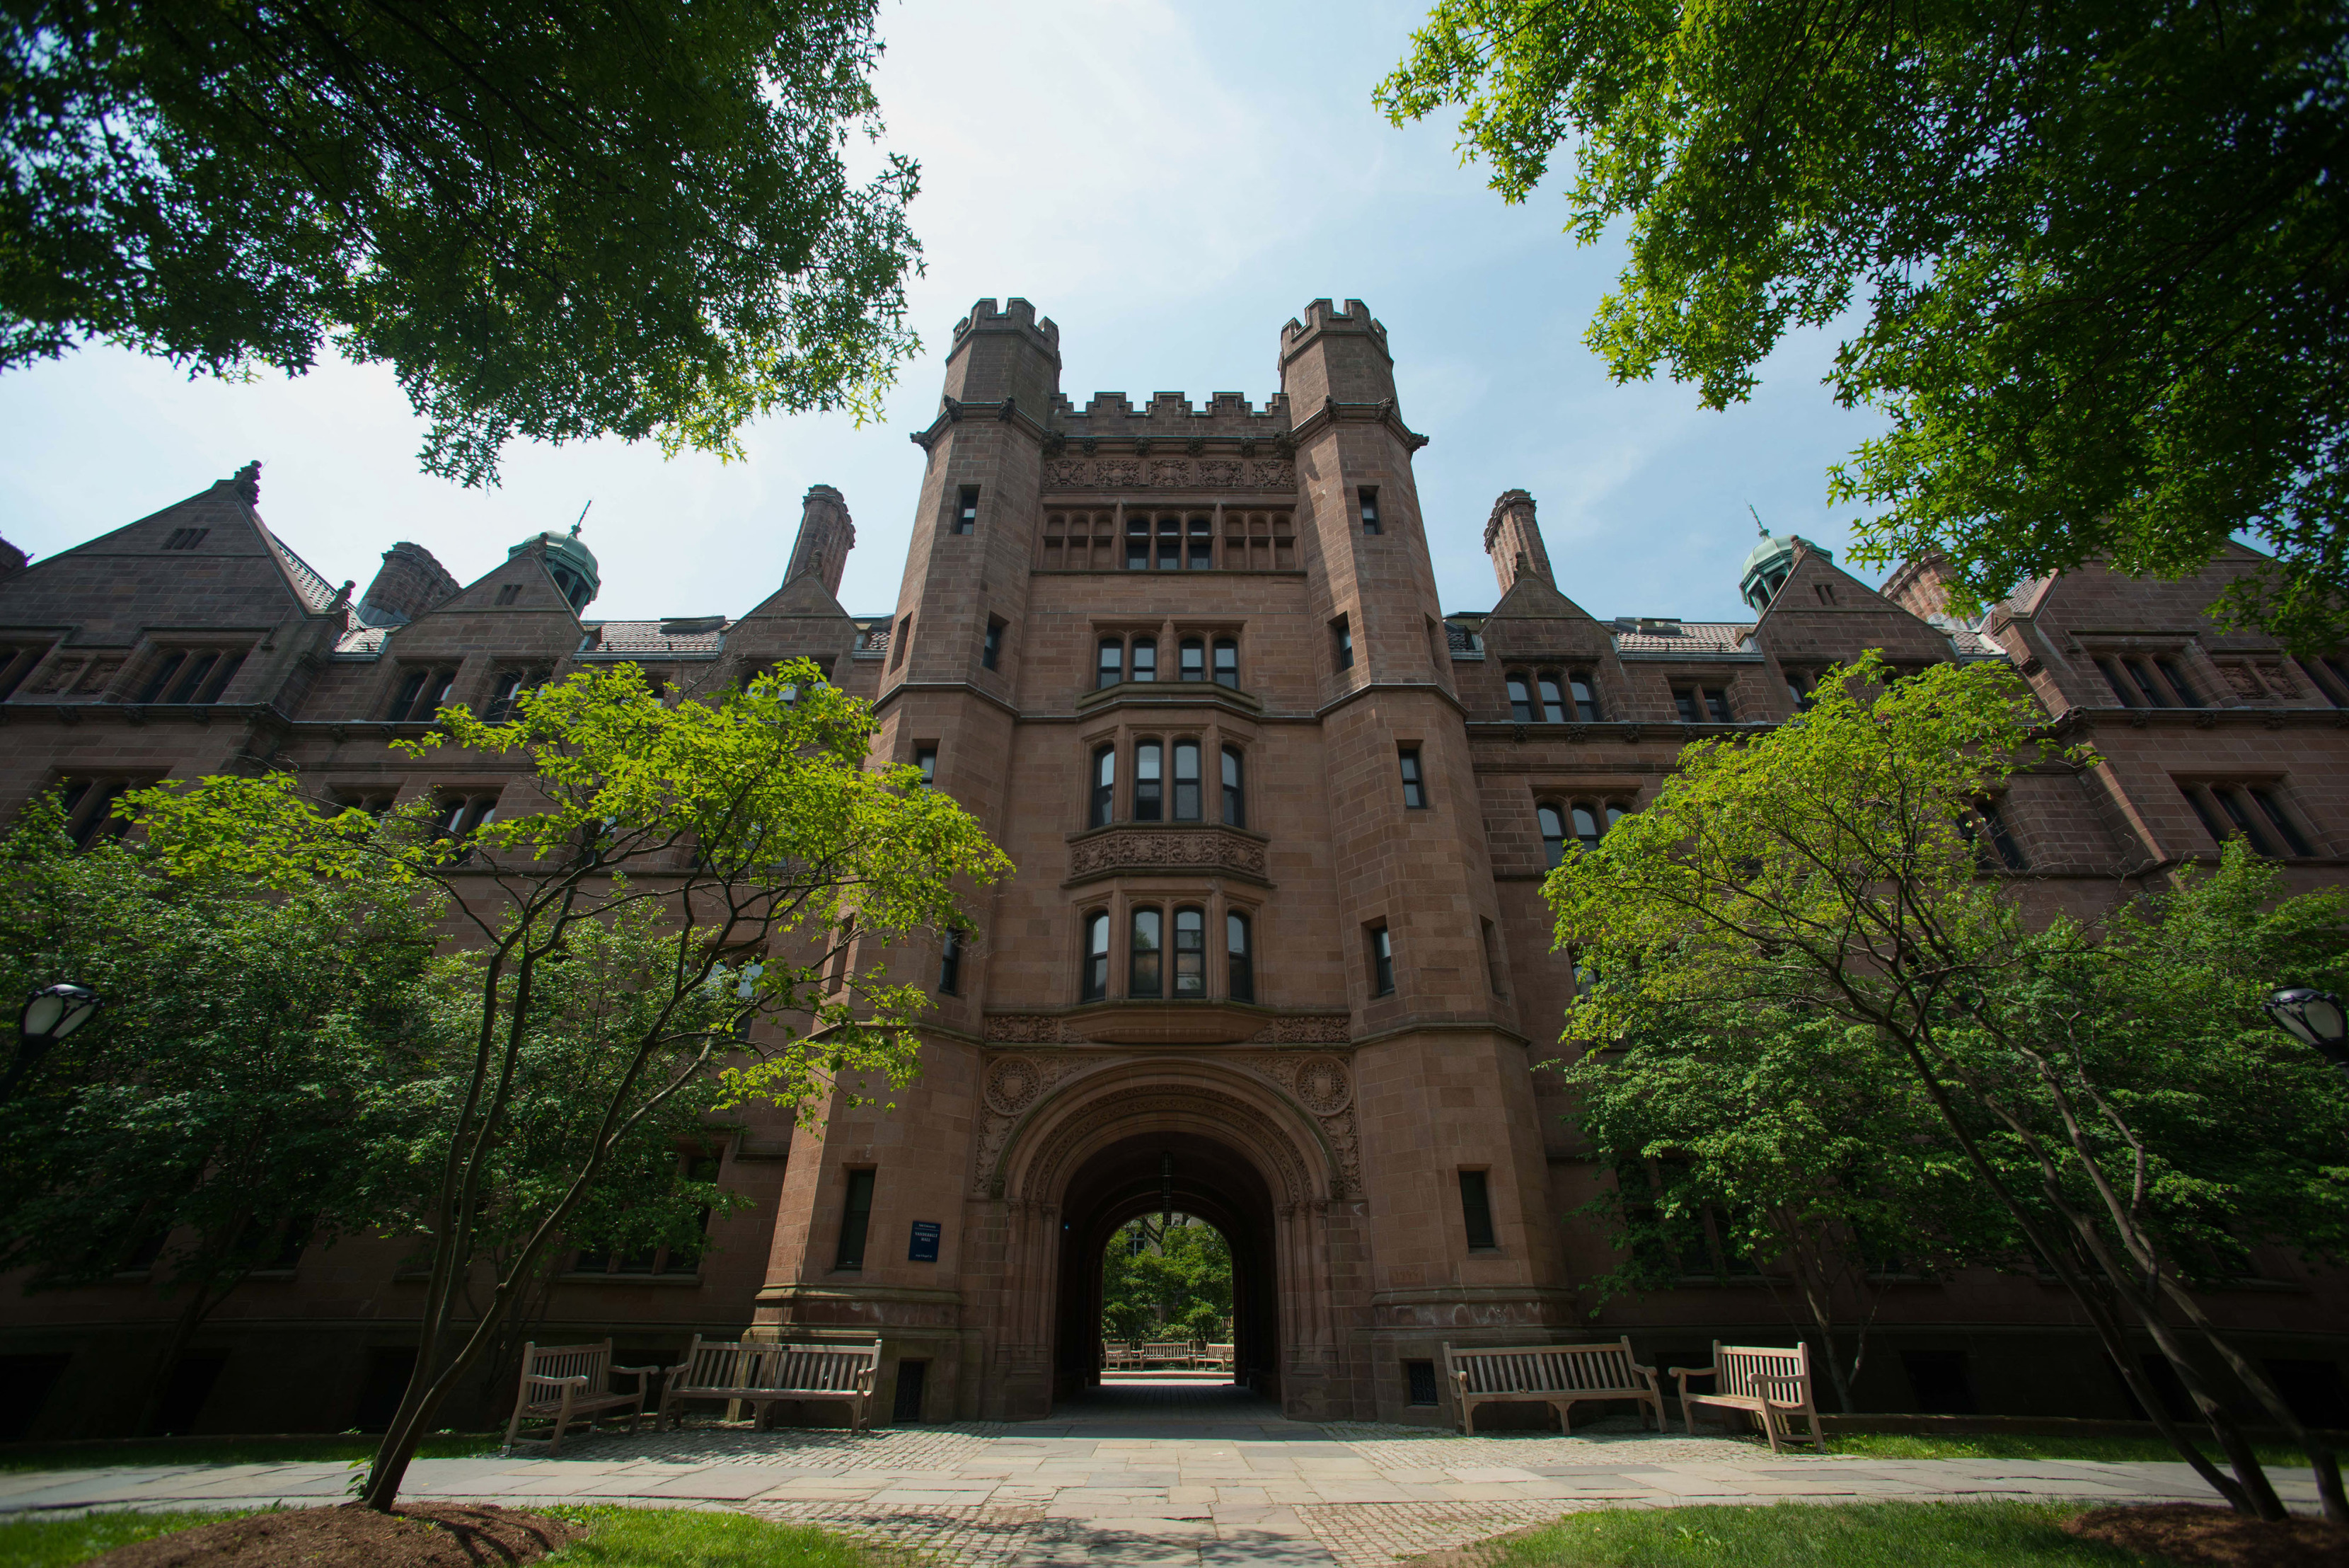 The campus of Yale University in New Haven, CT, U.S., on Friday, June 12, 2015. (Craig Warga—Bloomberg Finance LP/Getty Images)